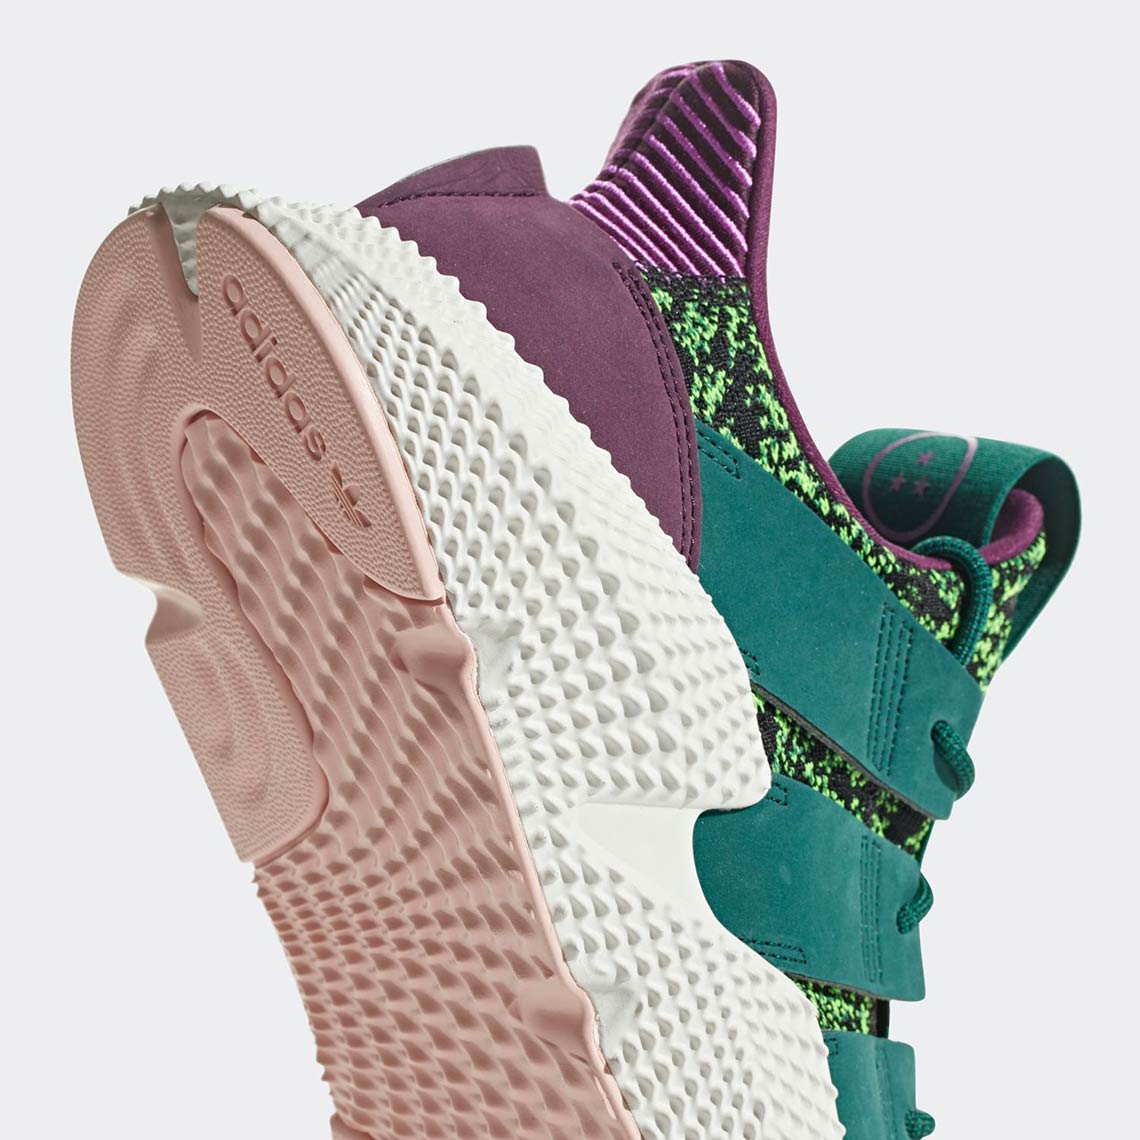 adidas Prophere Cell Dragon Ball Z Release Info | SneakerNews.com